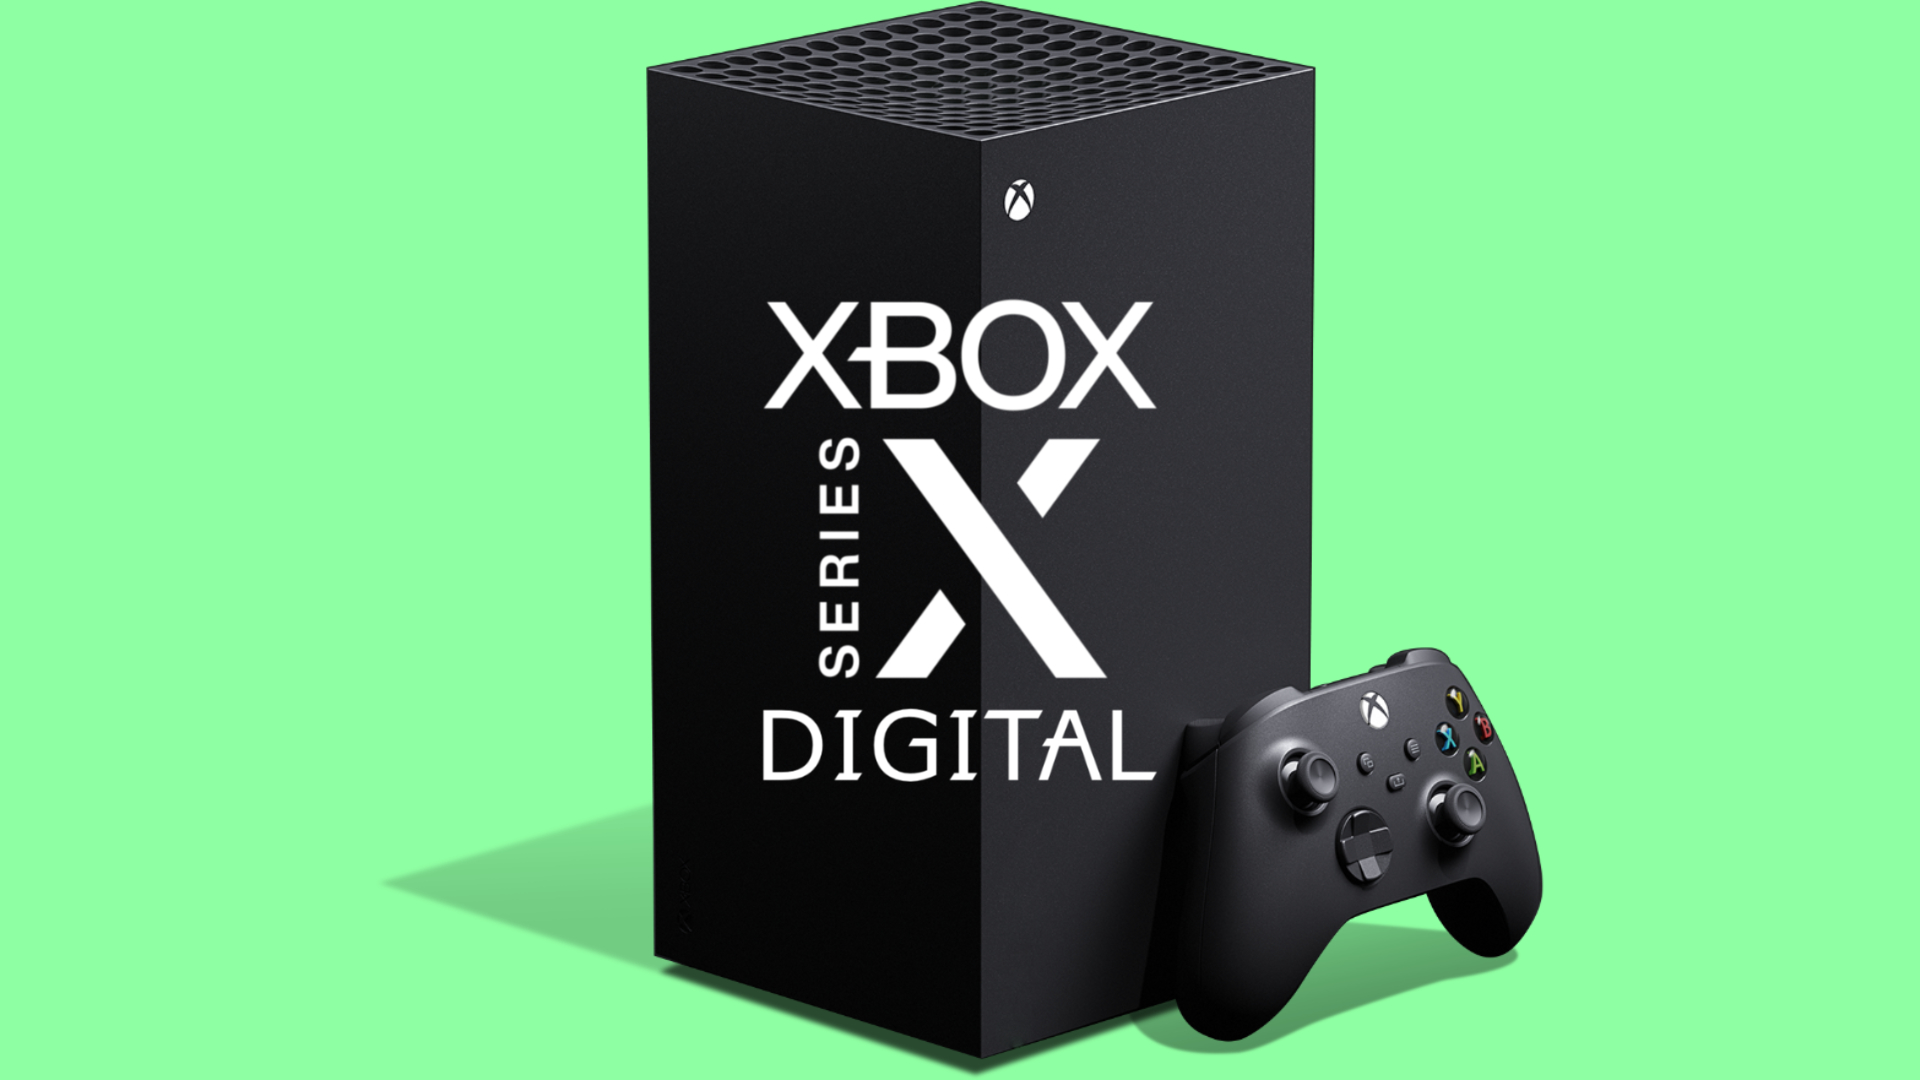 New rumor claims Microsoft could launch a disc-free Xbox Series X